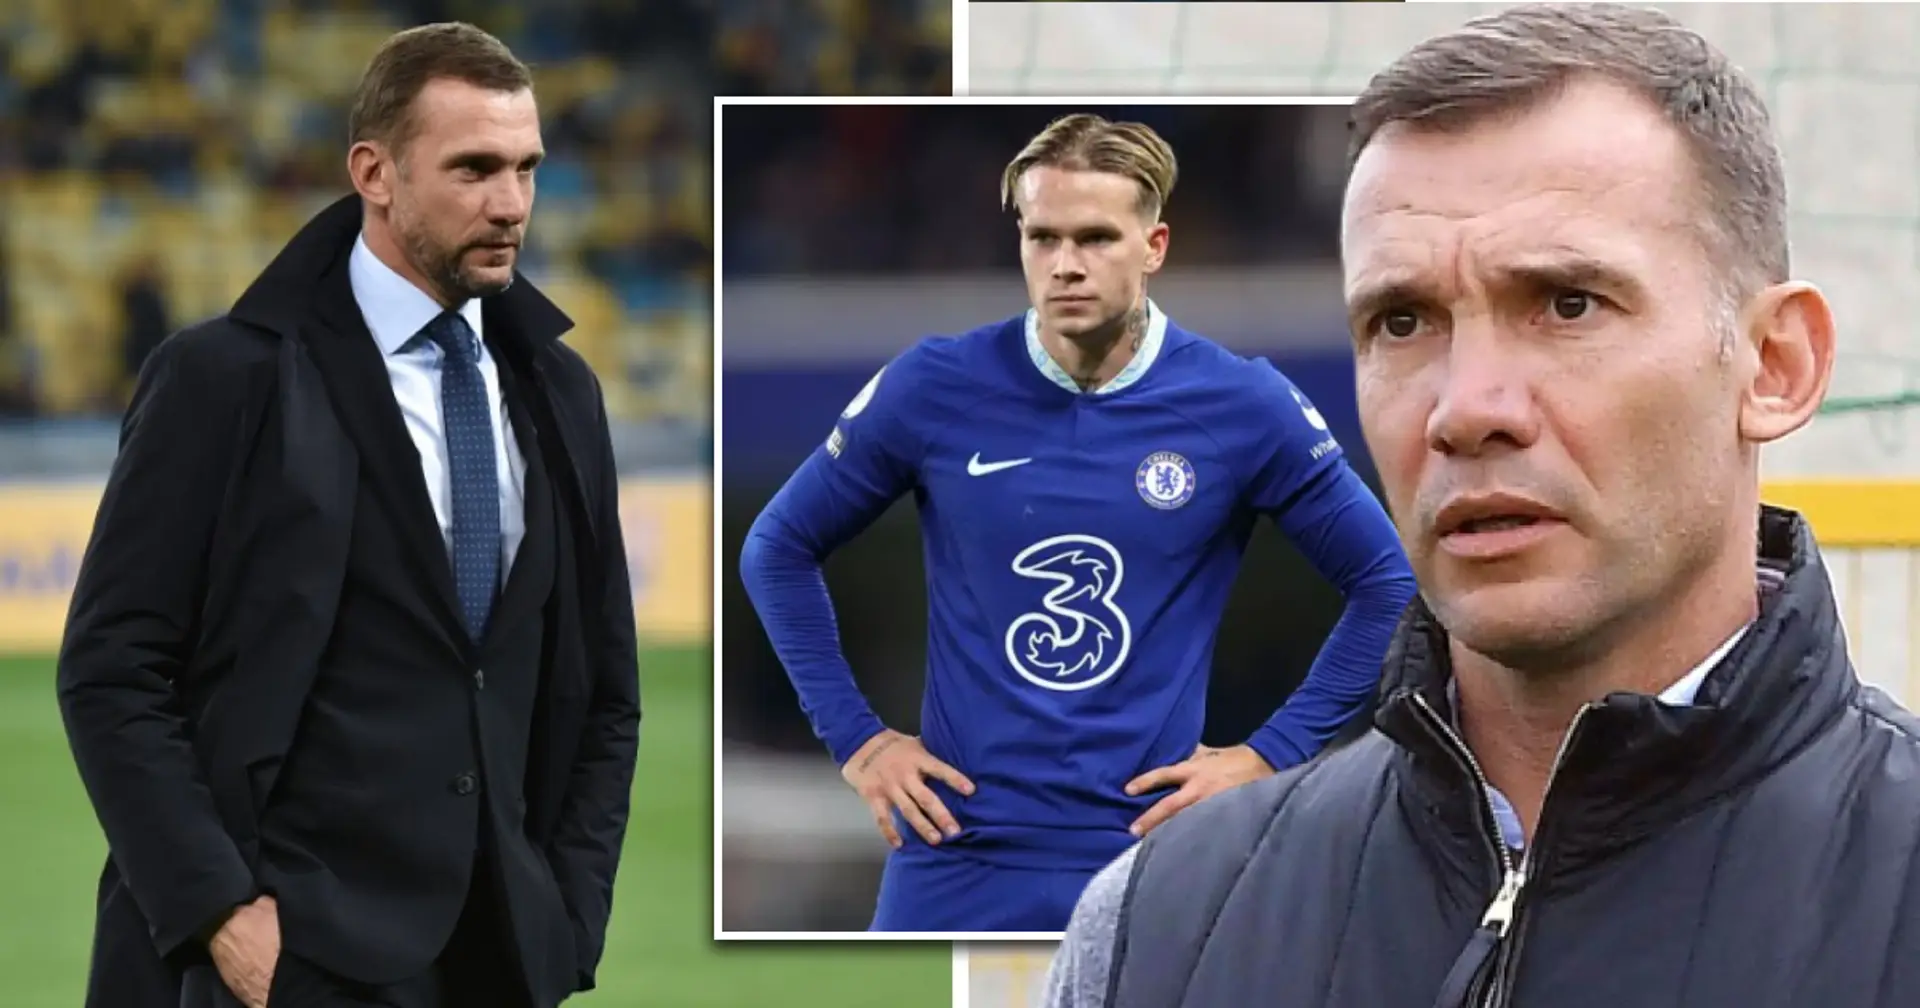 'For me he is quality': Andriy Shevchenko defends Mykhailo Mudryk after a difficult start at Stamford Bridge